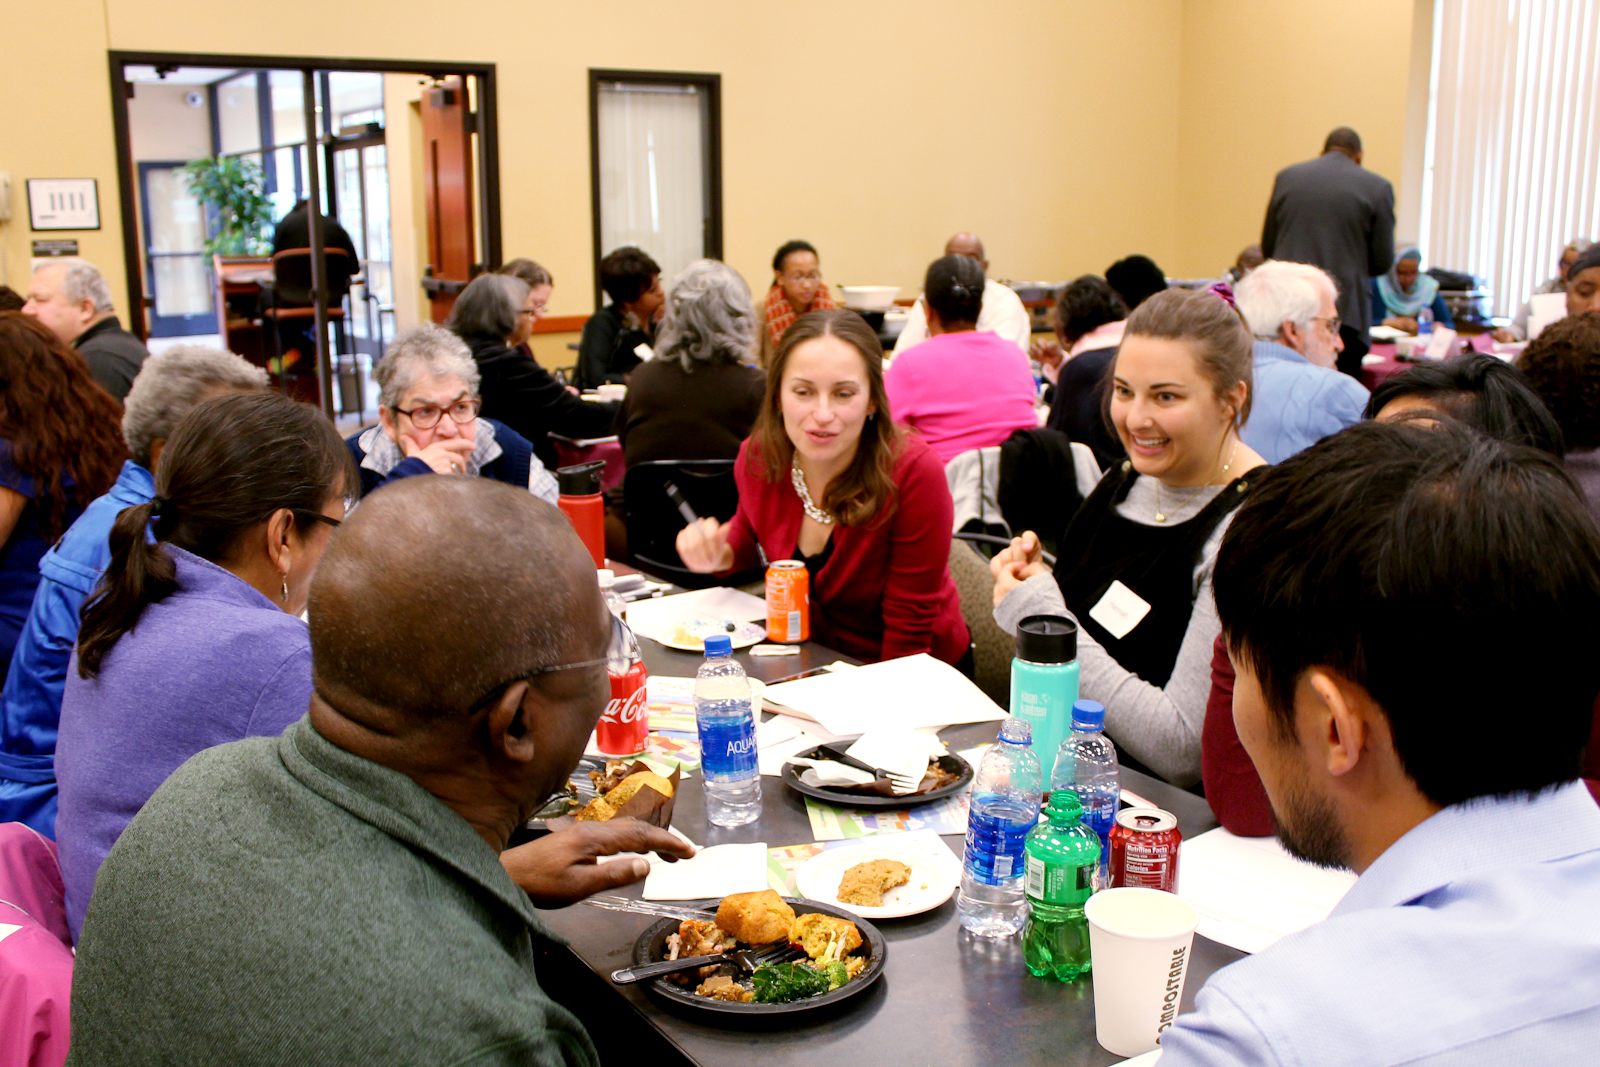 Grantee Tetyana Shippee speaks with participants seated at a table during a community forum on healthy aging